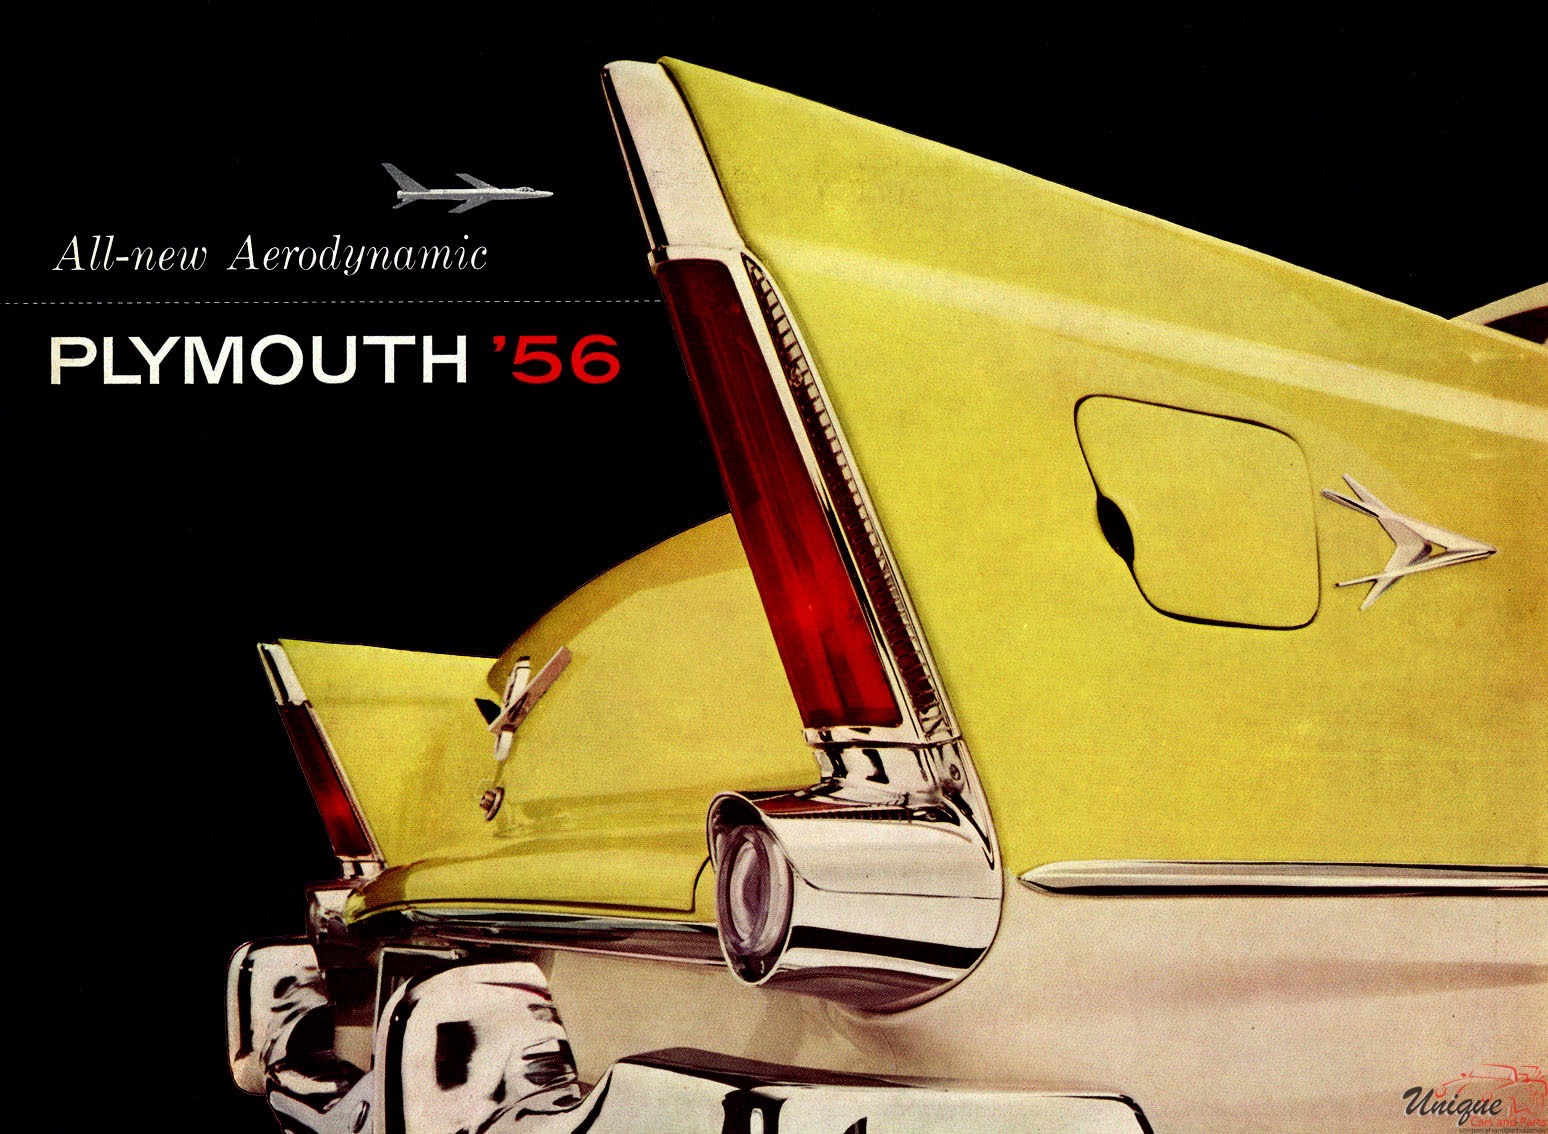 1956 Plymouth Brochure Page 2